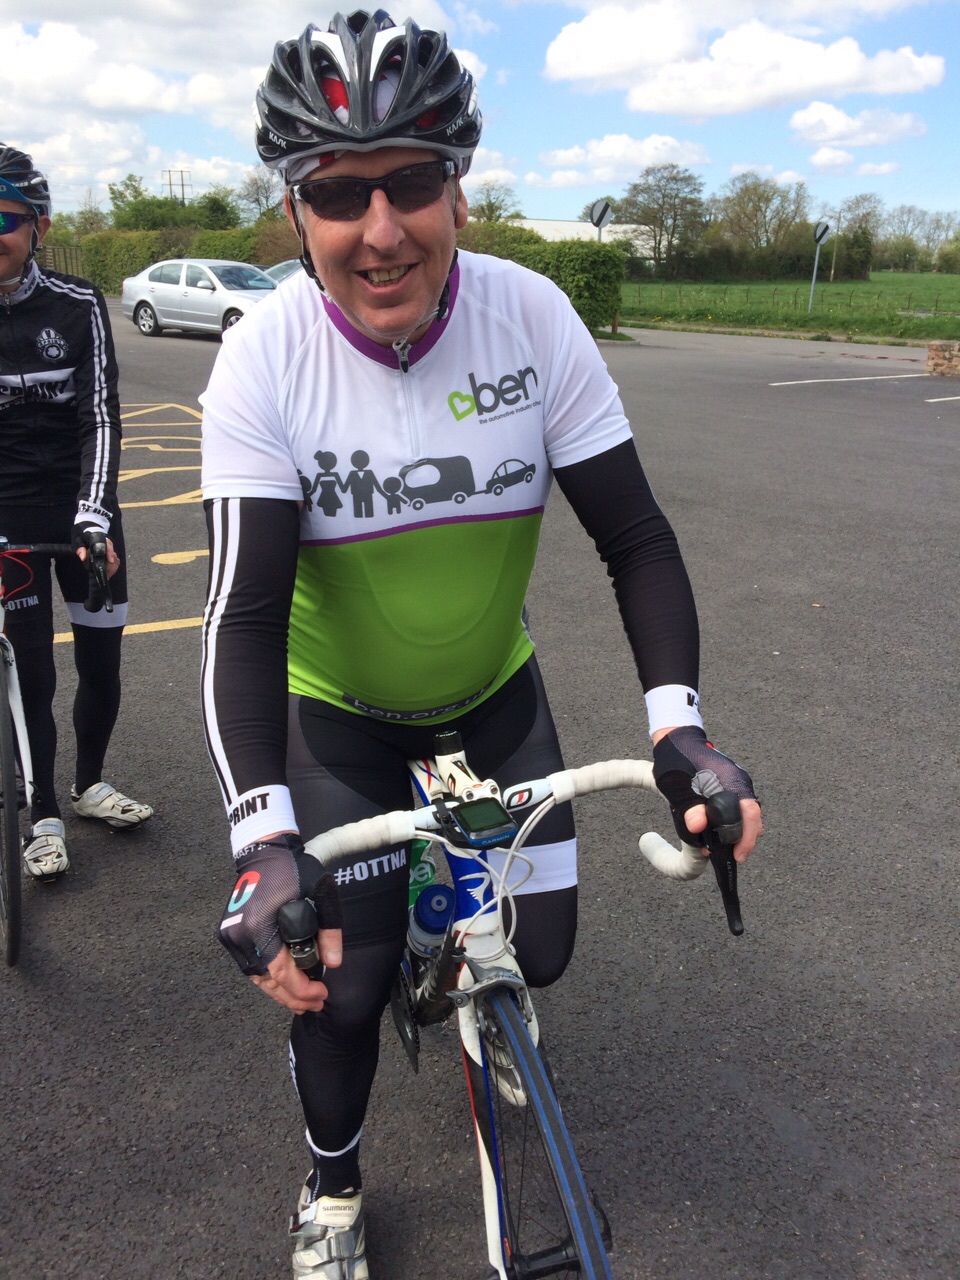 Kidney scare inspires Parts Alliance manager to ride London to Paris 24H charity challenge